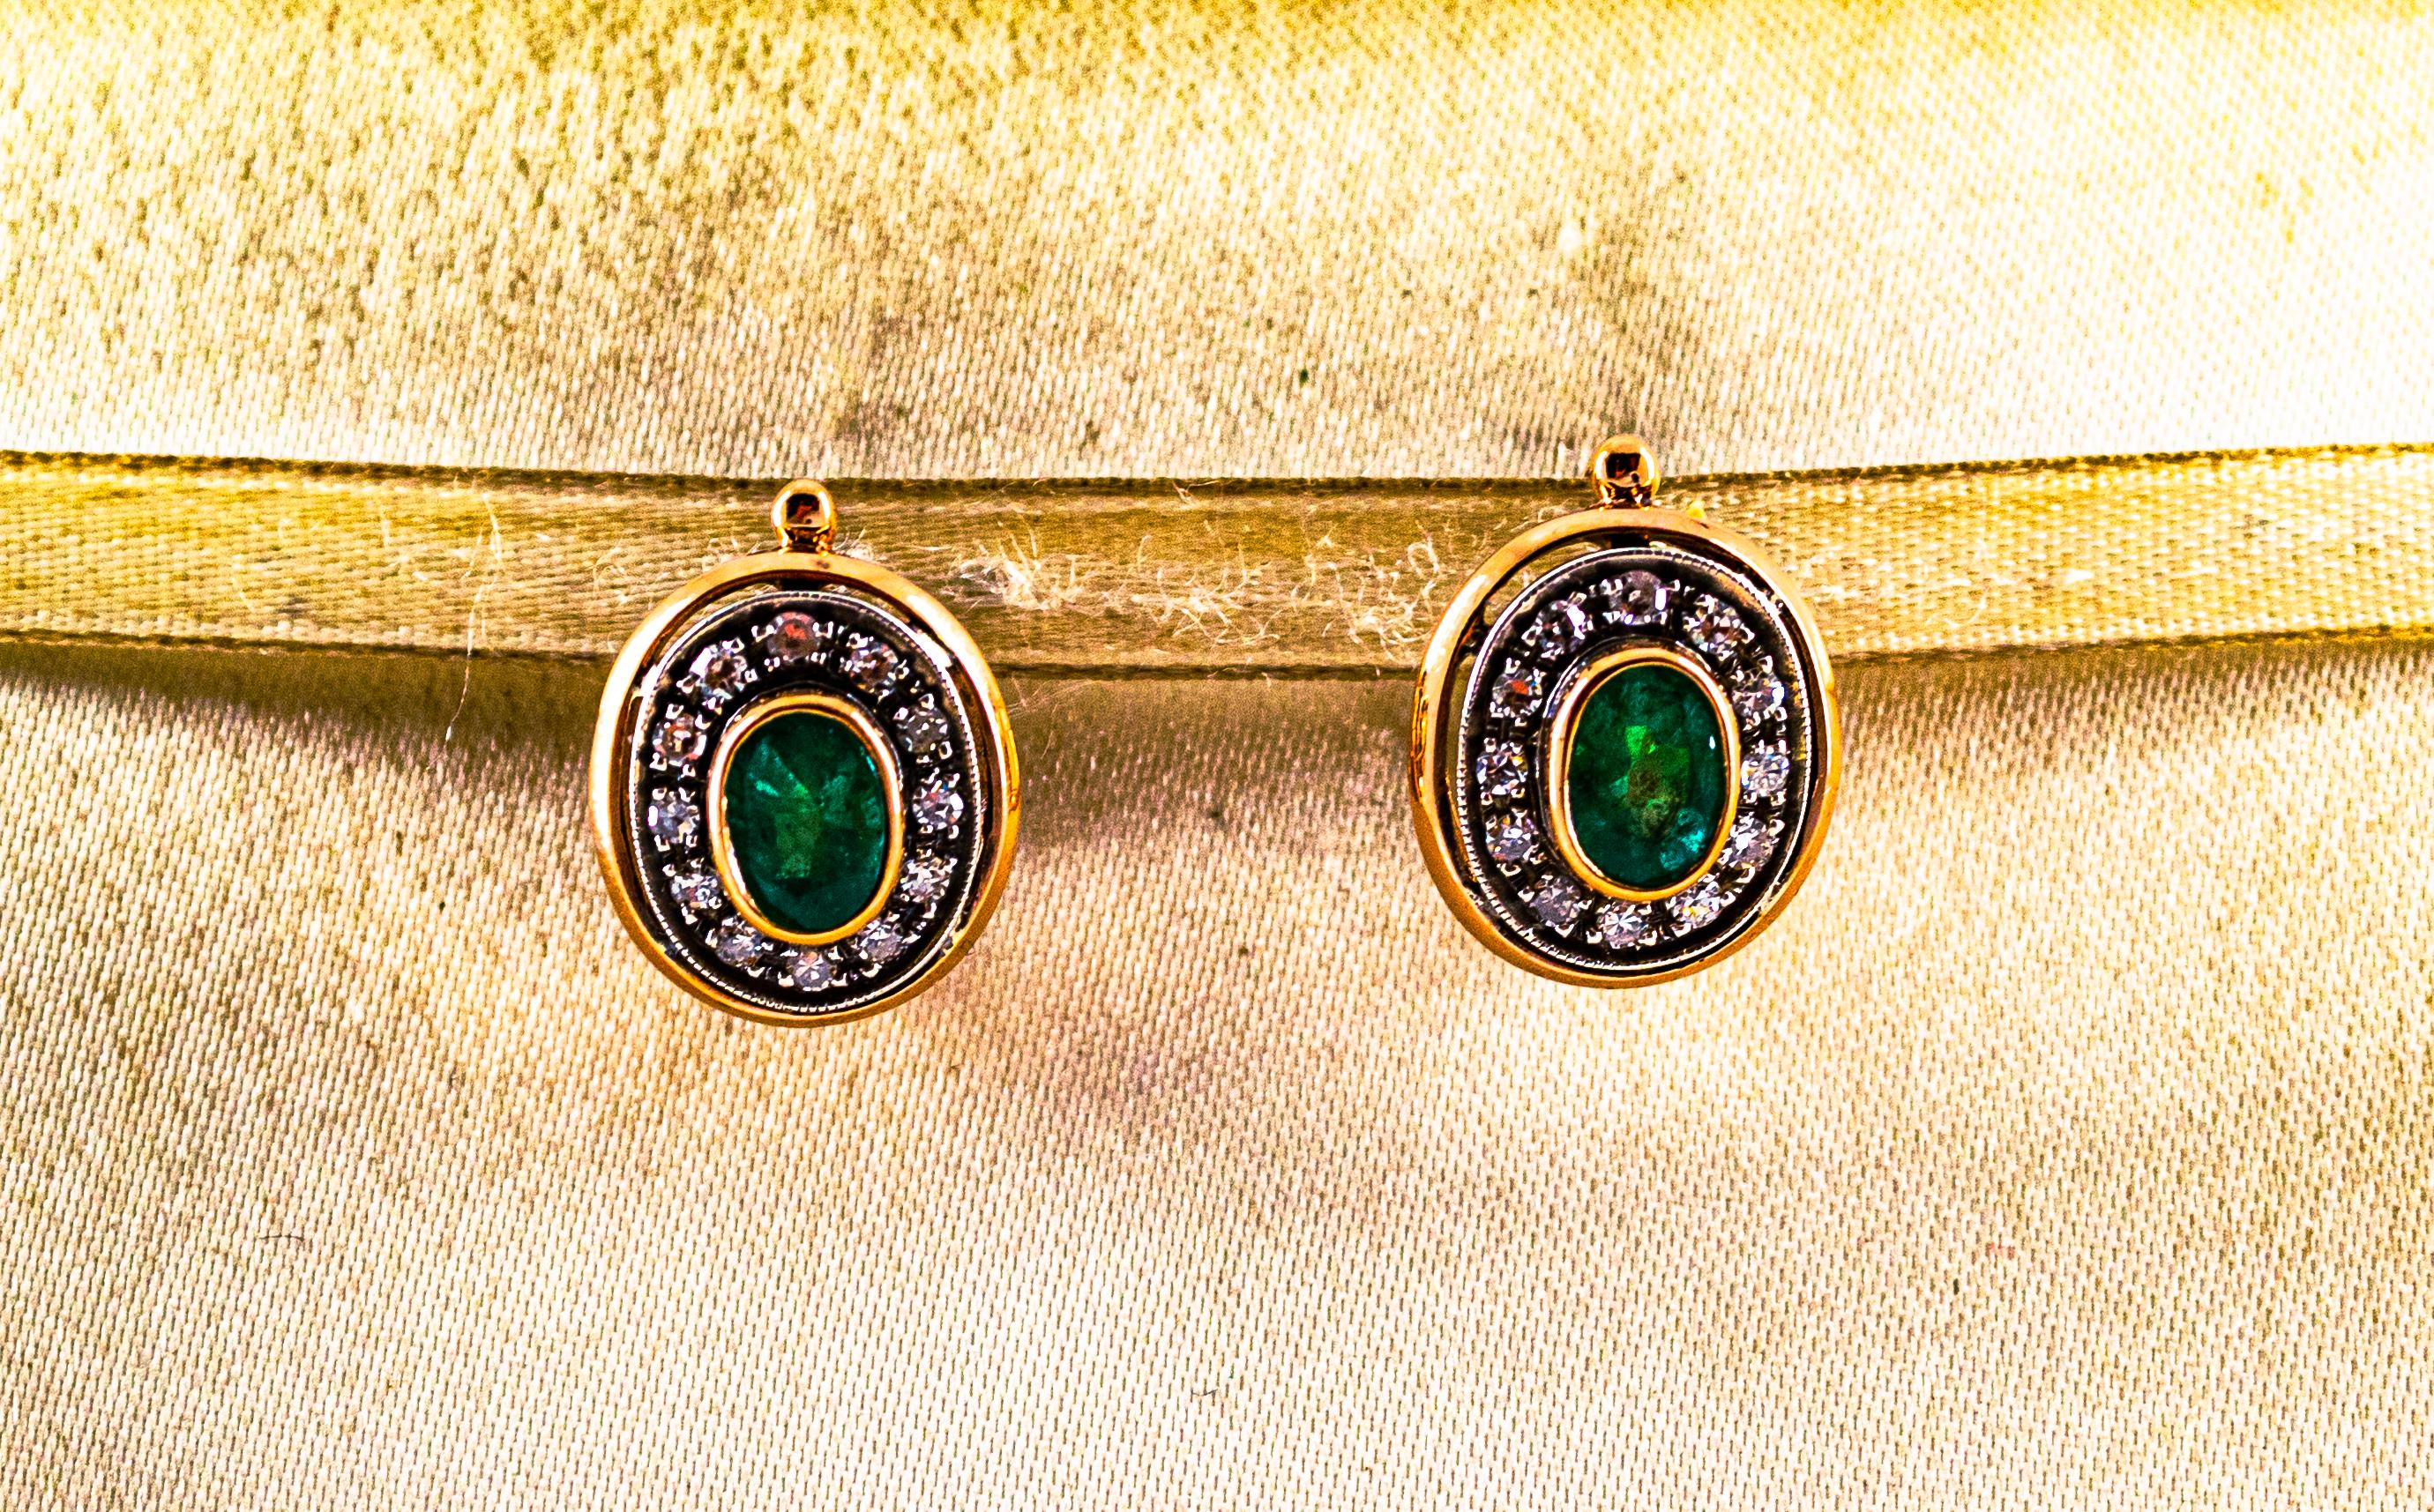 These Lever-Back Earrings are made of 9K Yellow Gold and Sterling Silver.
These Earrings have 0.45 Carats of White Modern Round Cut Diamonds.
These Earrings have 1.70 Carat of Oval Cut Emeralds.

These Earrings have also their matching Ring.
These